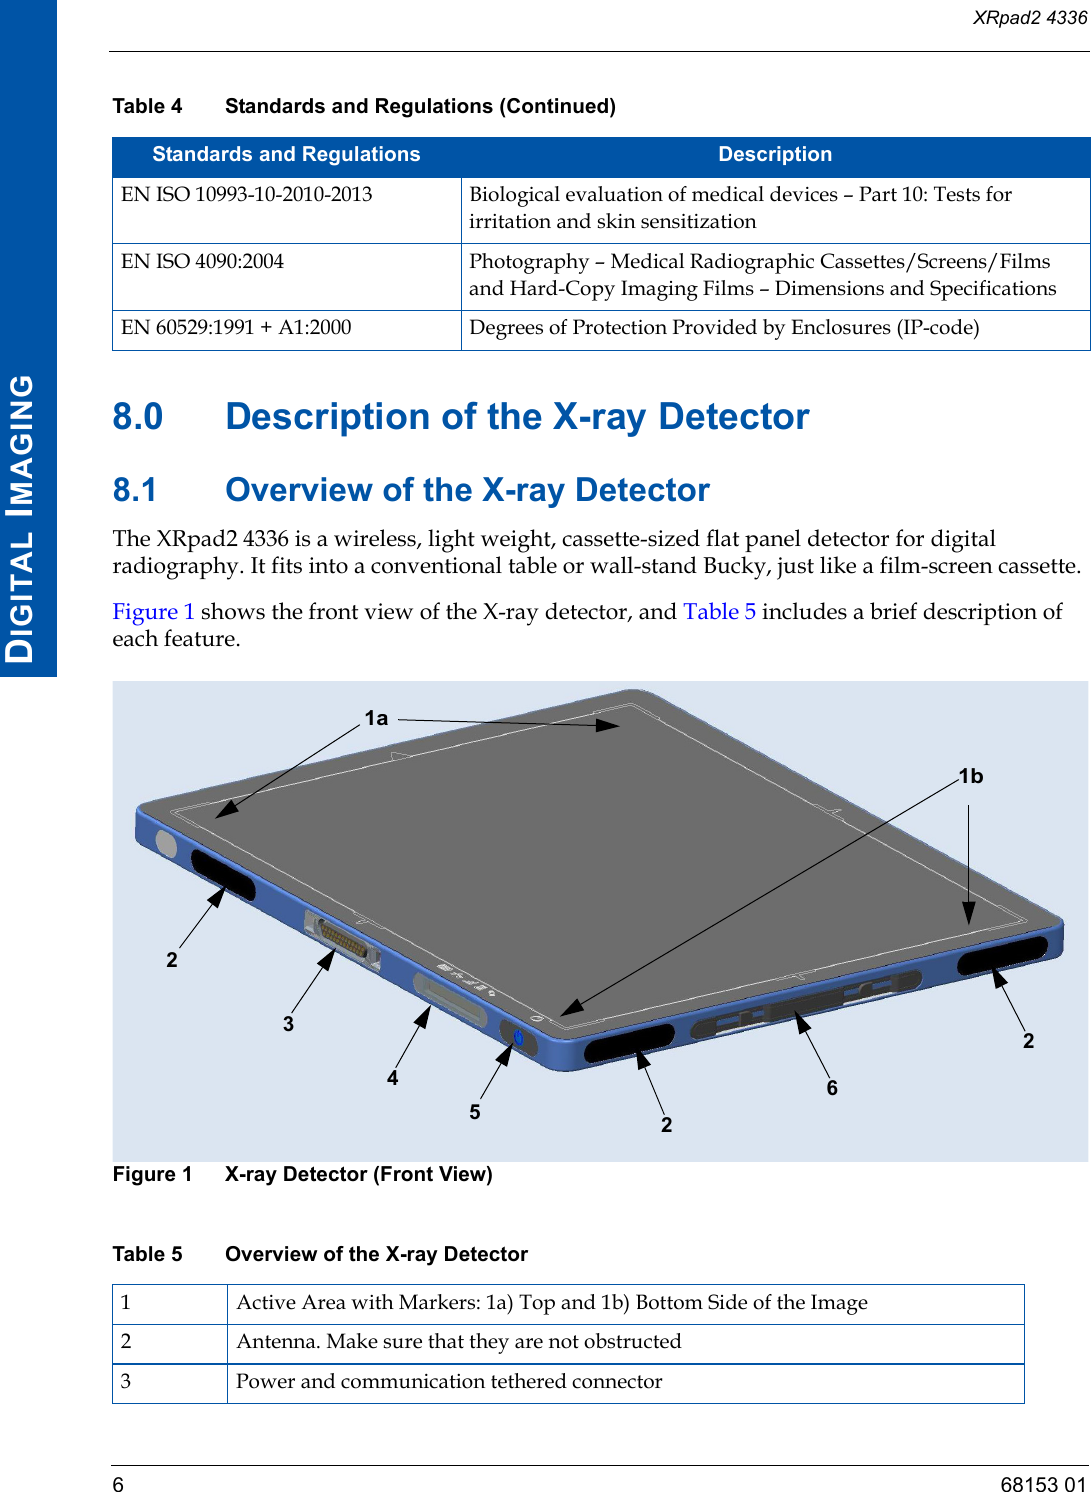 XRpad2 4336668153 01DIGITAL IMAGING8.0 Description of the X-ray Detector8.1 Overview of the X-ray DetectorThe XRpad2 4336 is a wireless, light weight, cassette-sized flat panel detector for digital radiography. It fits into a conventional table or wall-stand Bucky, just like a film-screen cassette. Figure 1 shows the front view of the X-ray detector, and Table 5 includes a brief description of each feature. Figure 1 X-ray Detector (Front View)Standards and Regulations DescriptionEN ISO 10993-10-2010-2013 Biological evaluation of medical devices – Part 10: Tests for irritation and skin sensitizationEN ISO 4090:2004 Photography – Medical Radiographic Cassettes/Screens/Films and Hard-Copy Imaging Films – Dimensions and SpecificationsEN 60529:1991 + A1:2000 Degrees of Protection Provided by Enclosures (IP-code)Table 5 Overview of the X-ray Detector1 Active Area with Markers: 1a) Top and 1b) Bottom Side of the Image2 Antenna. Make sure that they are not obstructed3 Power and communication tethered connectorTable 4 Standards and Regulations (Continued)1a23452621b